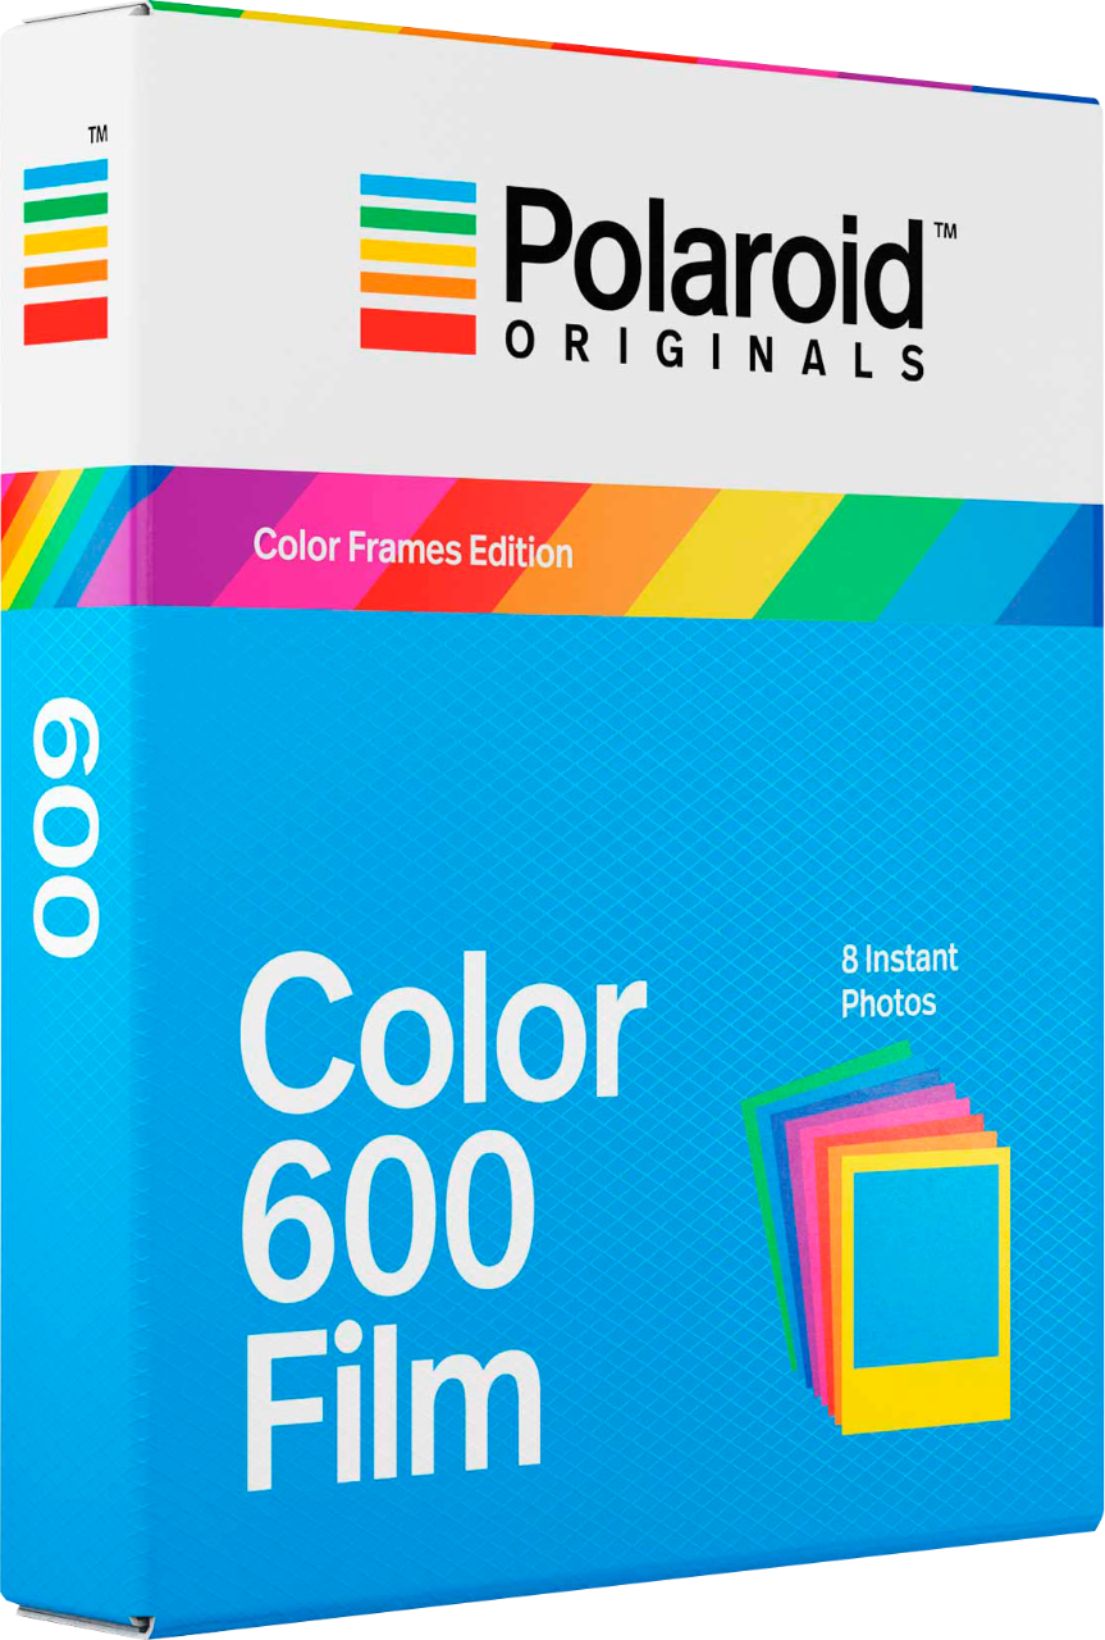 Polaroid 600 Film Different Colored Frames 4672 - Best Buy